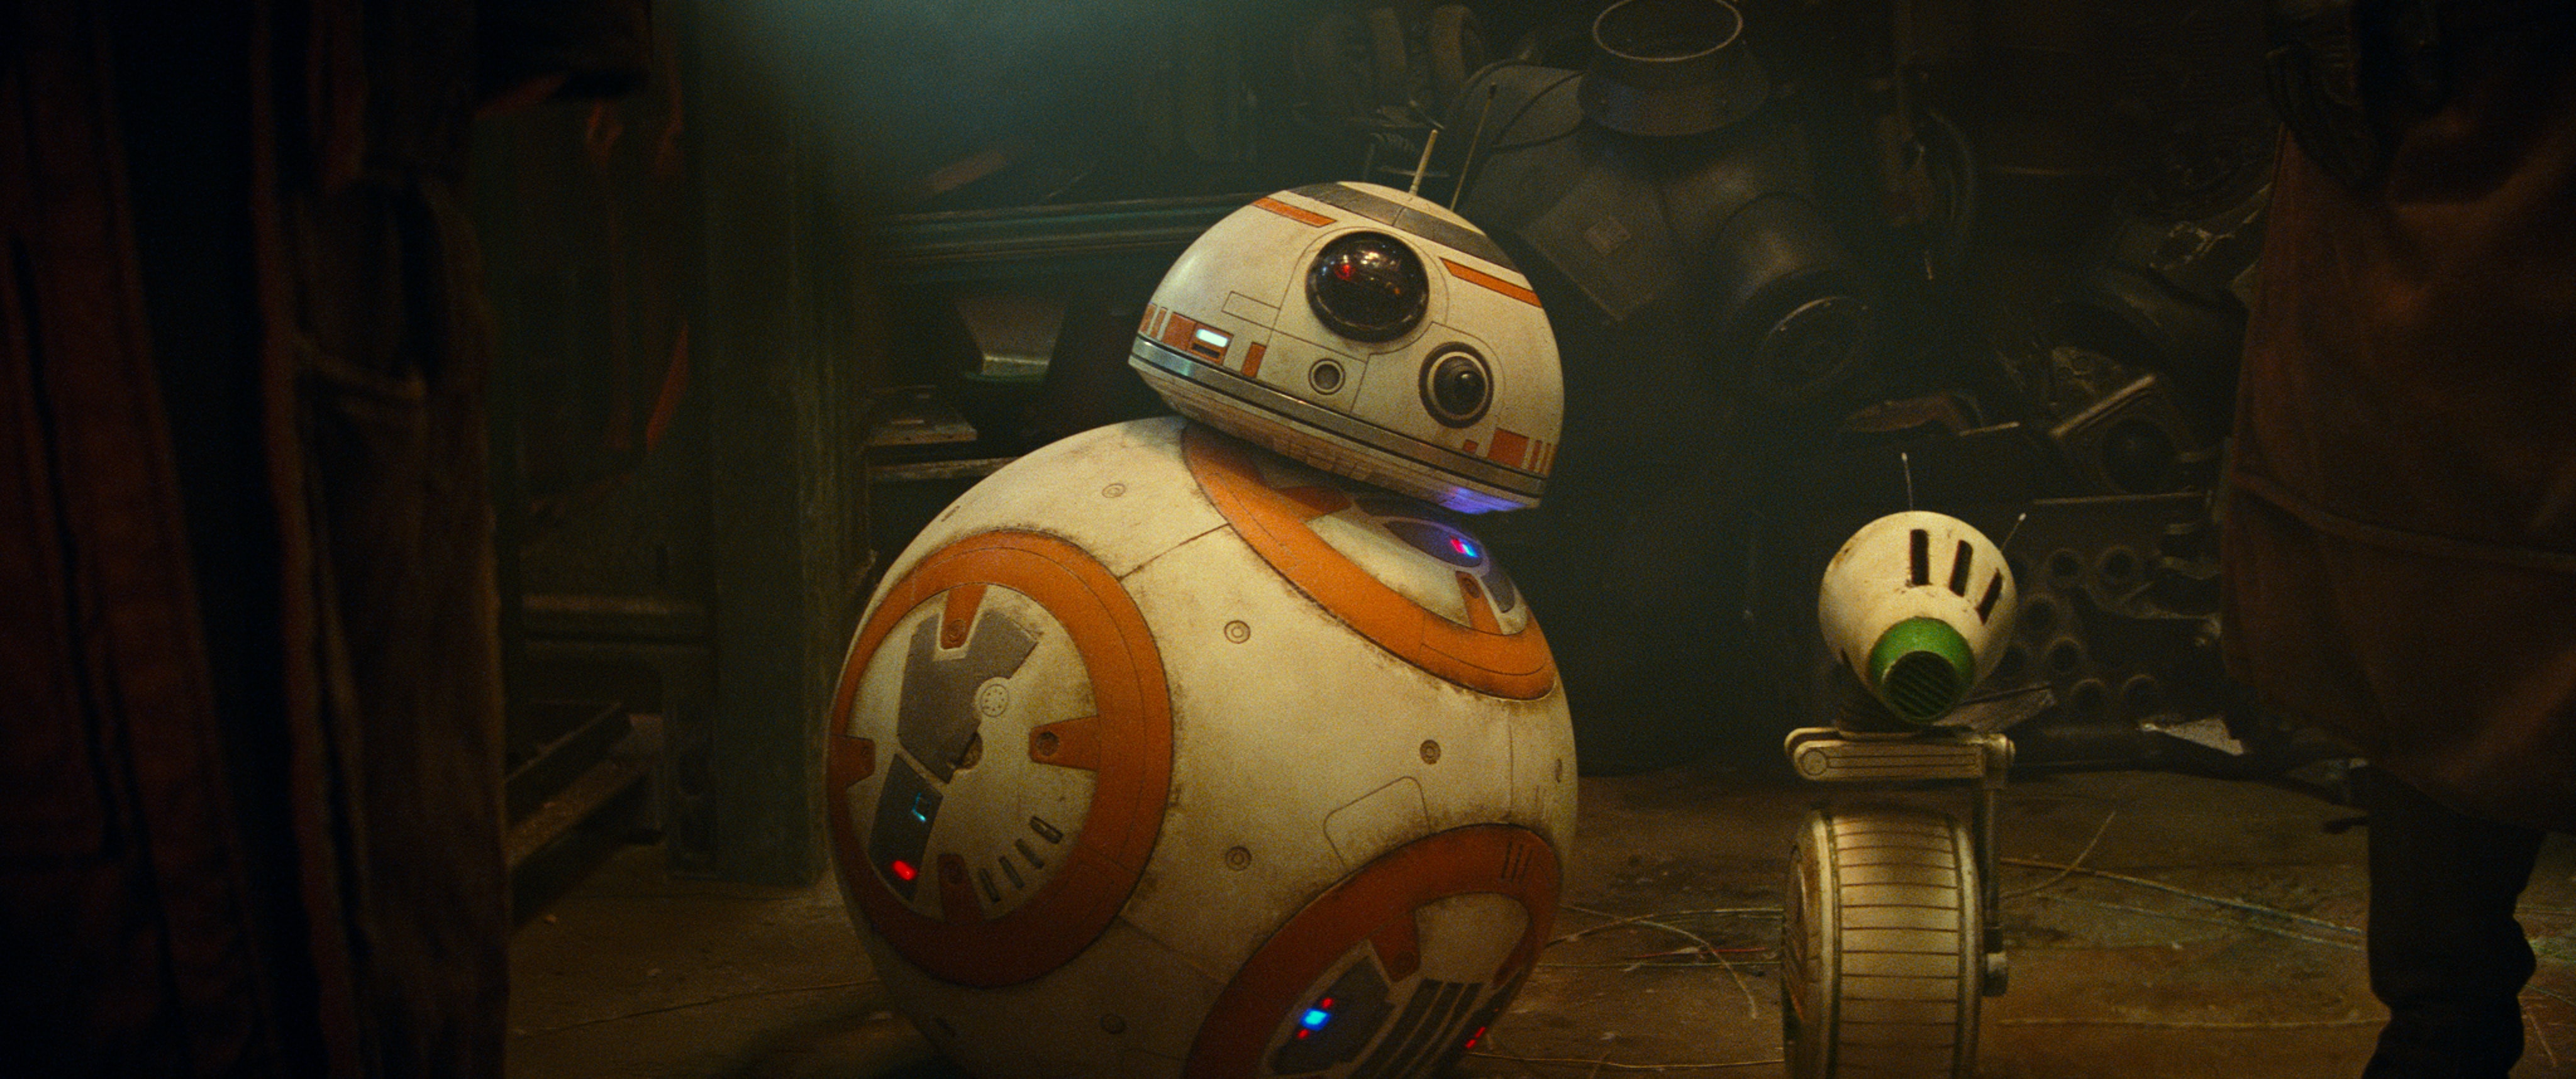 BB-8 and D-O Star Wars Episode IX